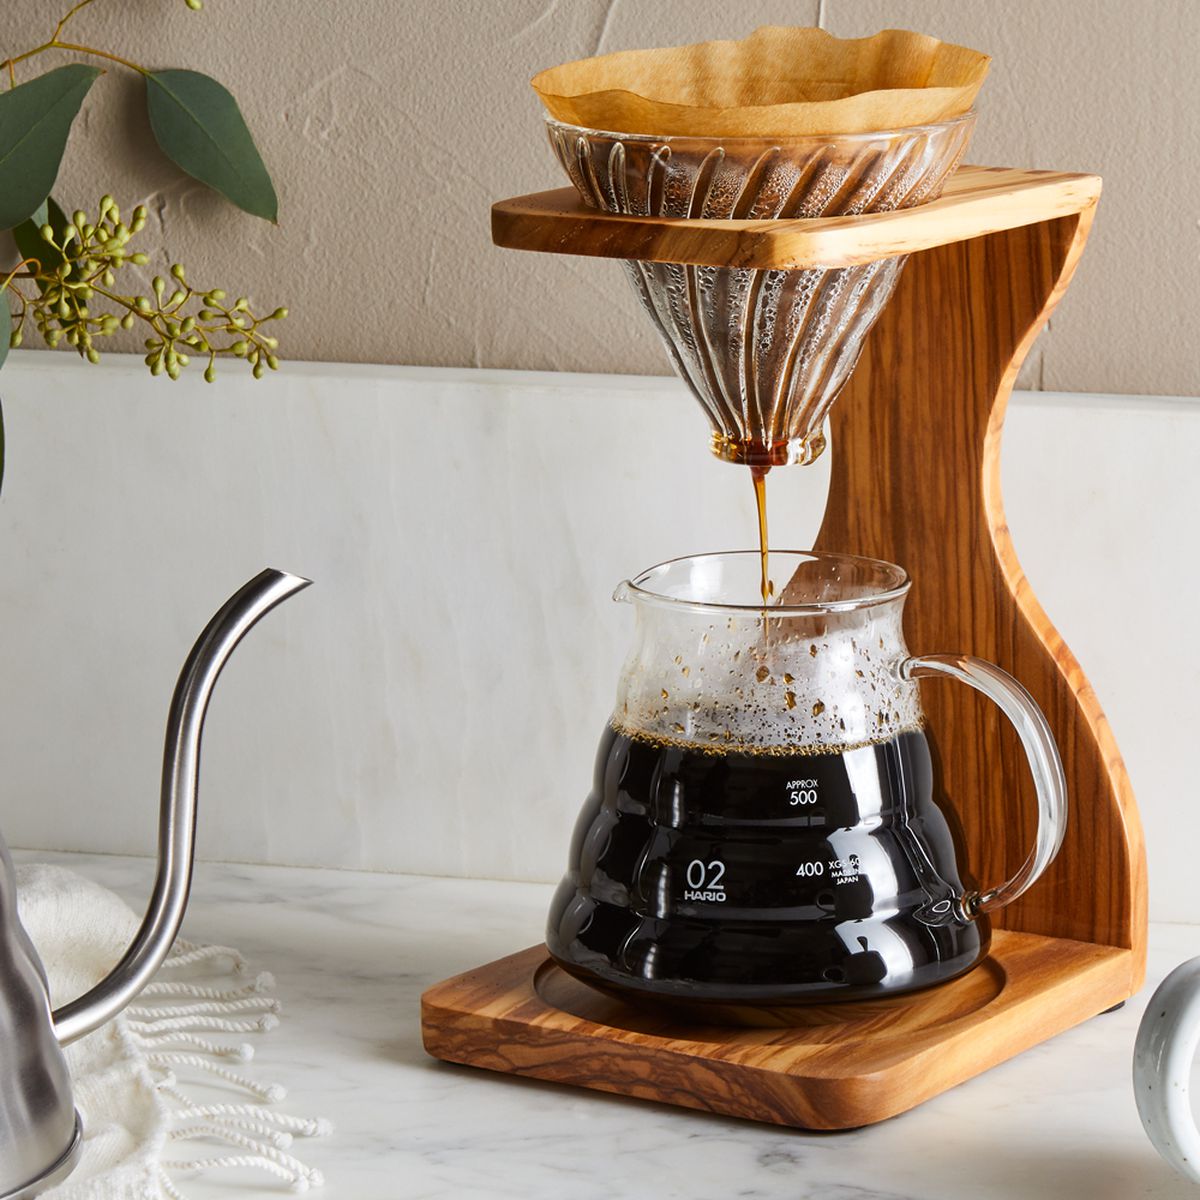 Rolling Paper Substitute Coffee Filter: An Unconventional Solution for a Perfect Brew